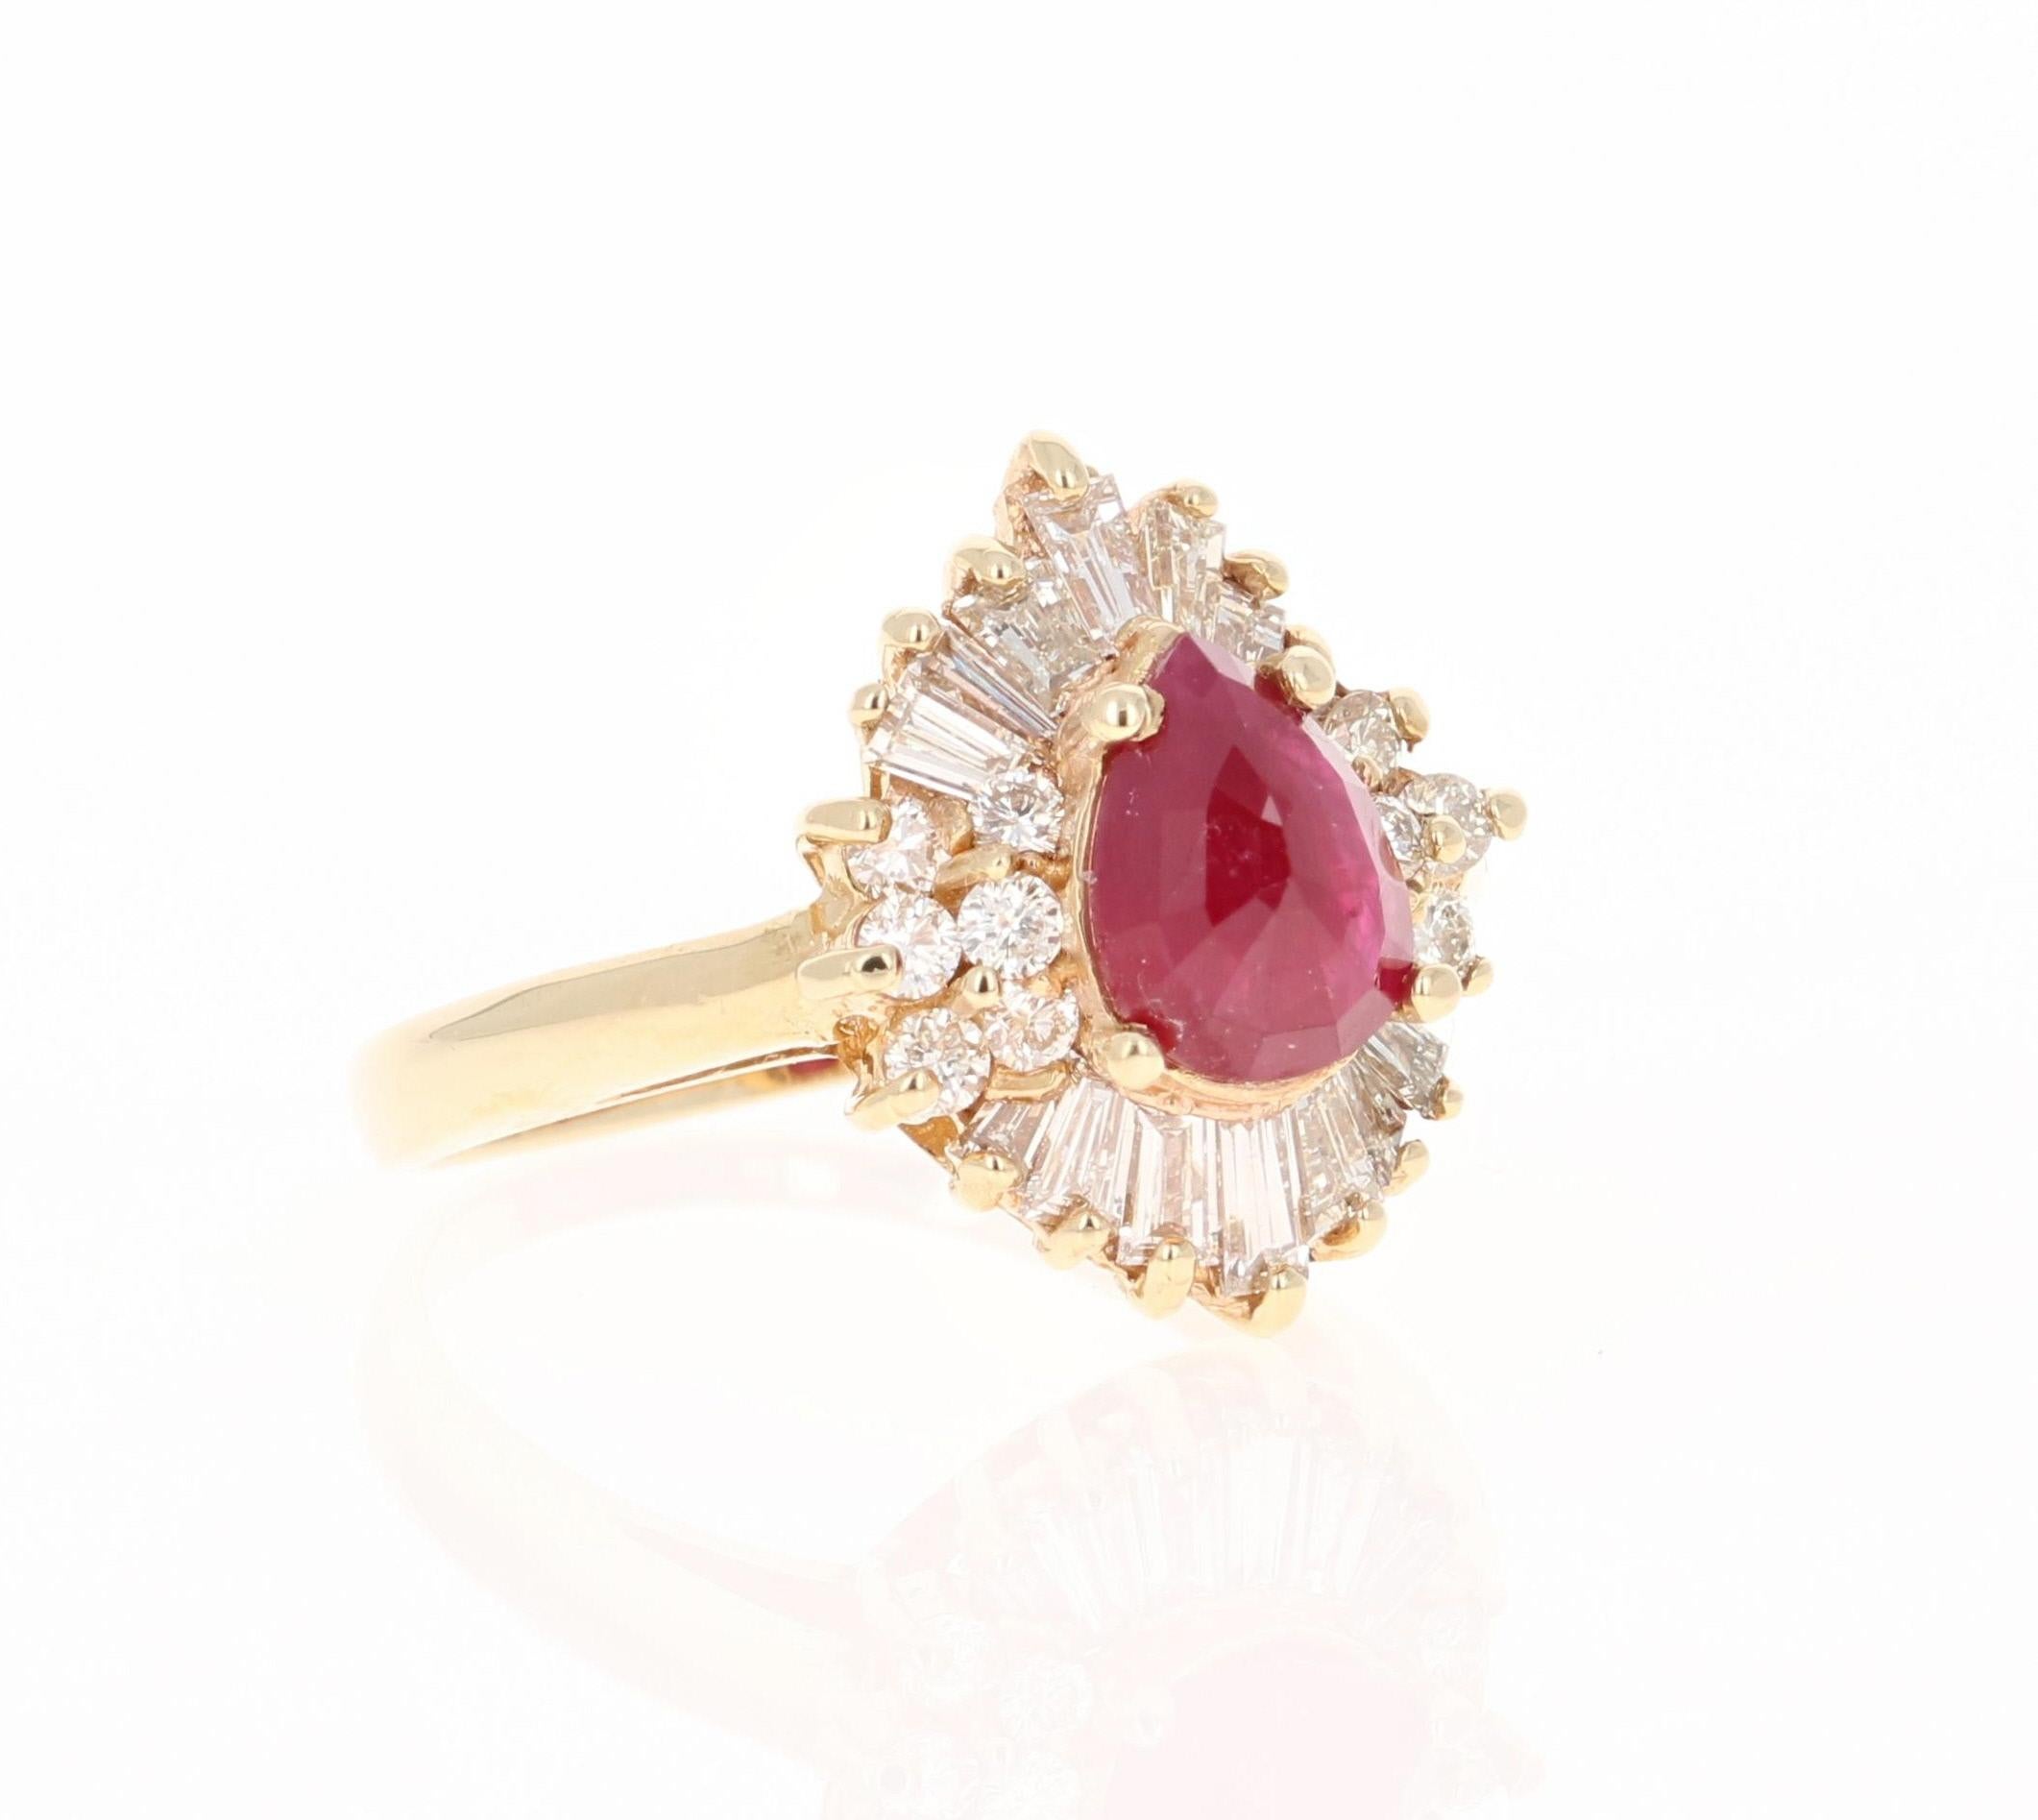 This ring has a pretty pear cut Ruby that weighs 1.40 carats and has 12 round cut diamonds that weigh 0.32 carats, (clarity: VS, color: H) and 14 baguette cut diamonds that weigh 0.77 carats, (clarity: VS, color: H)

The Pear Cut Ruby measures at